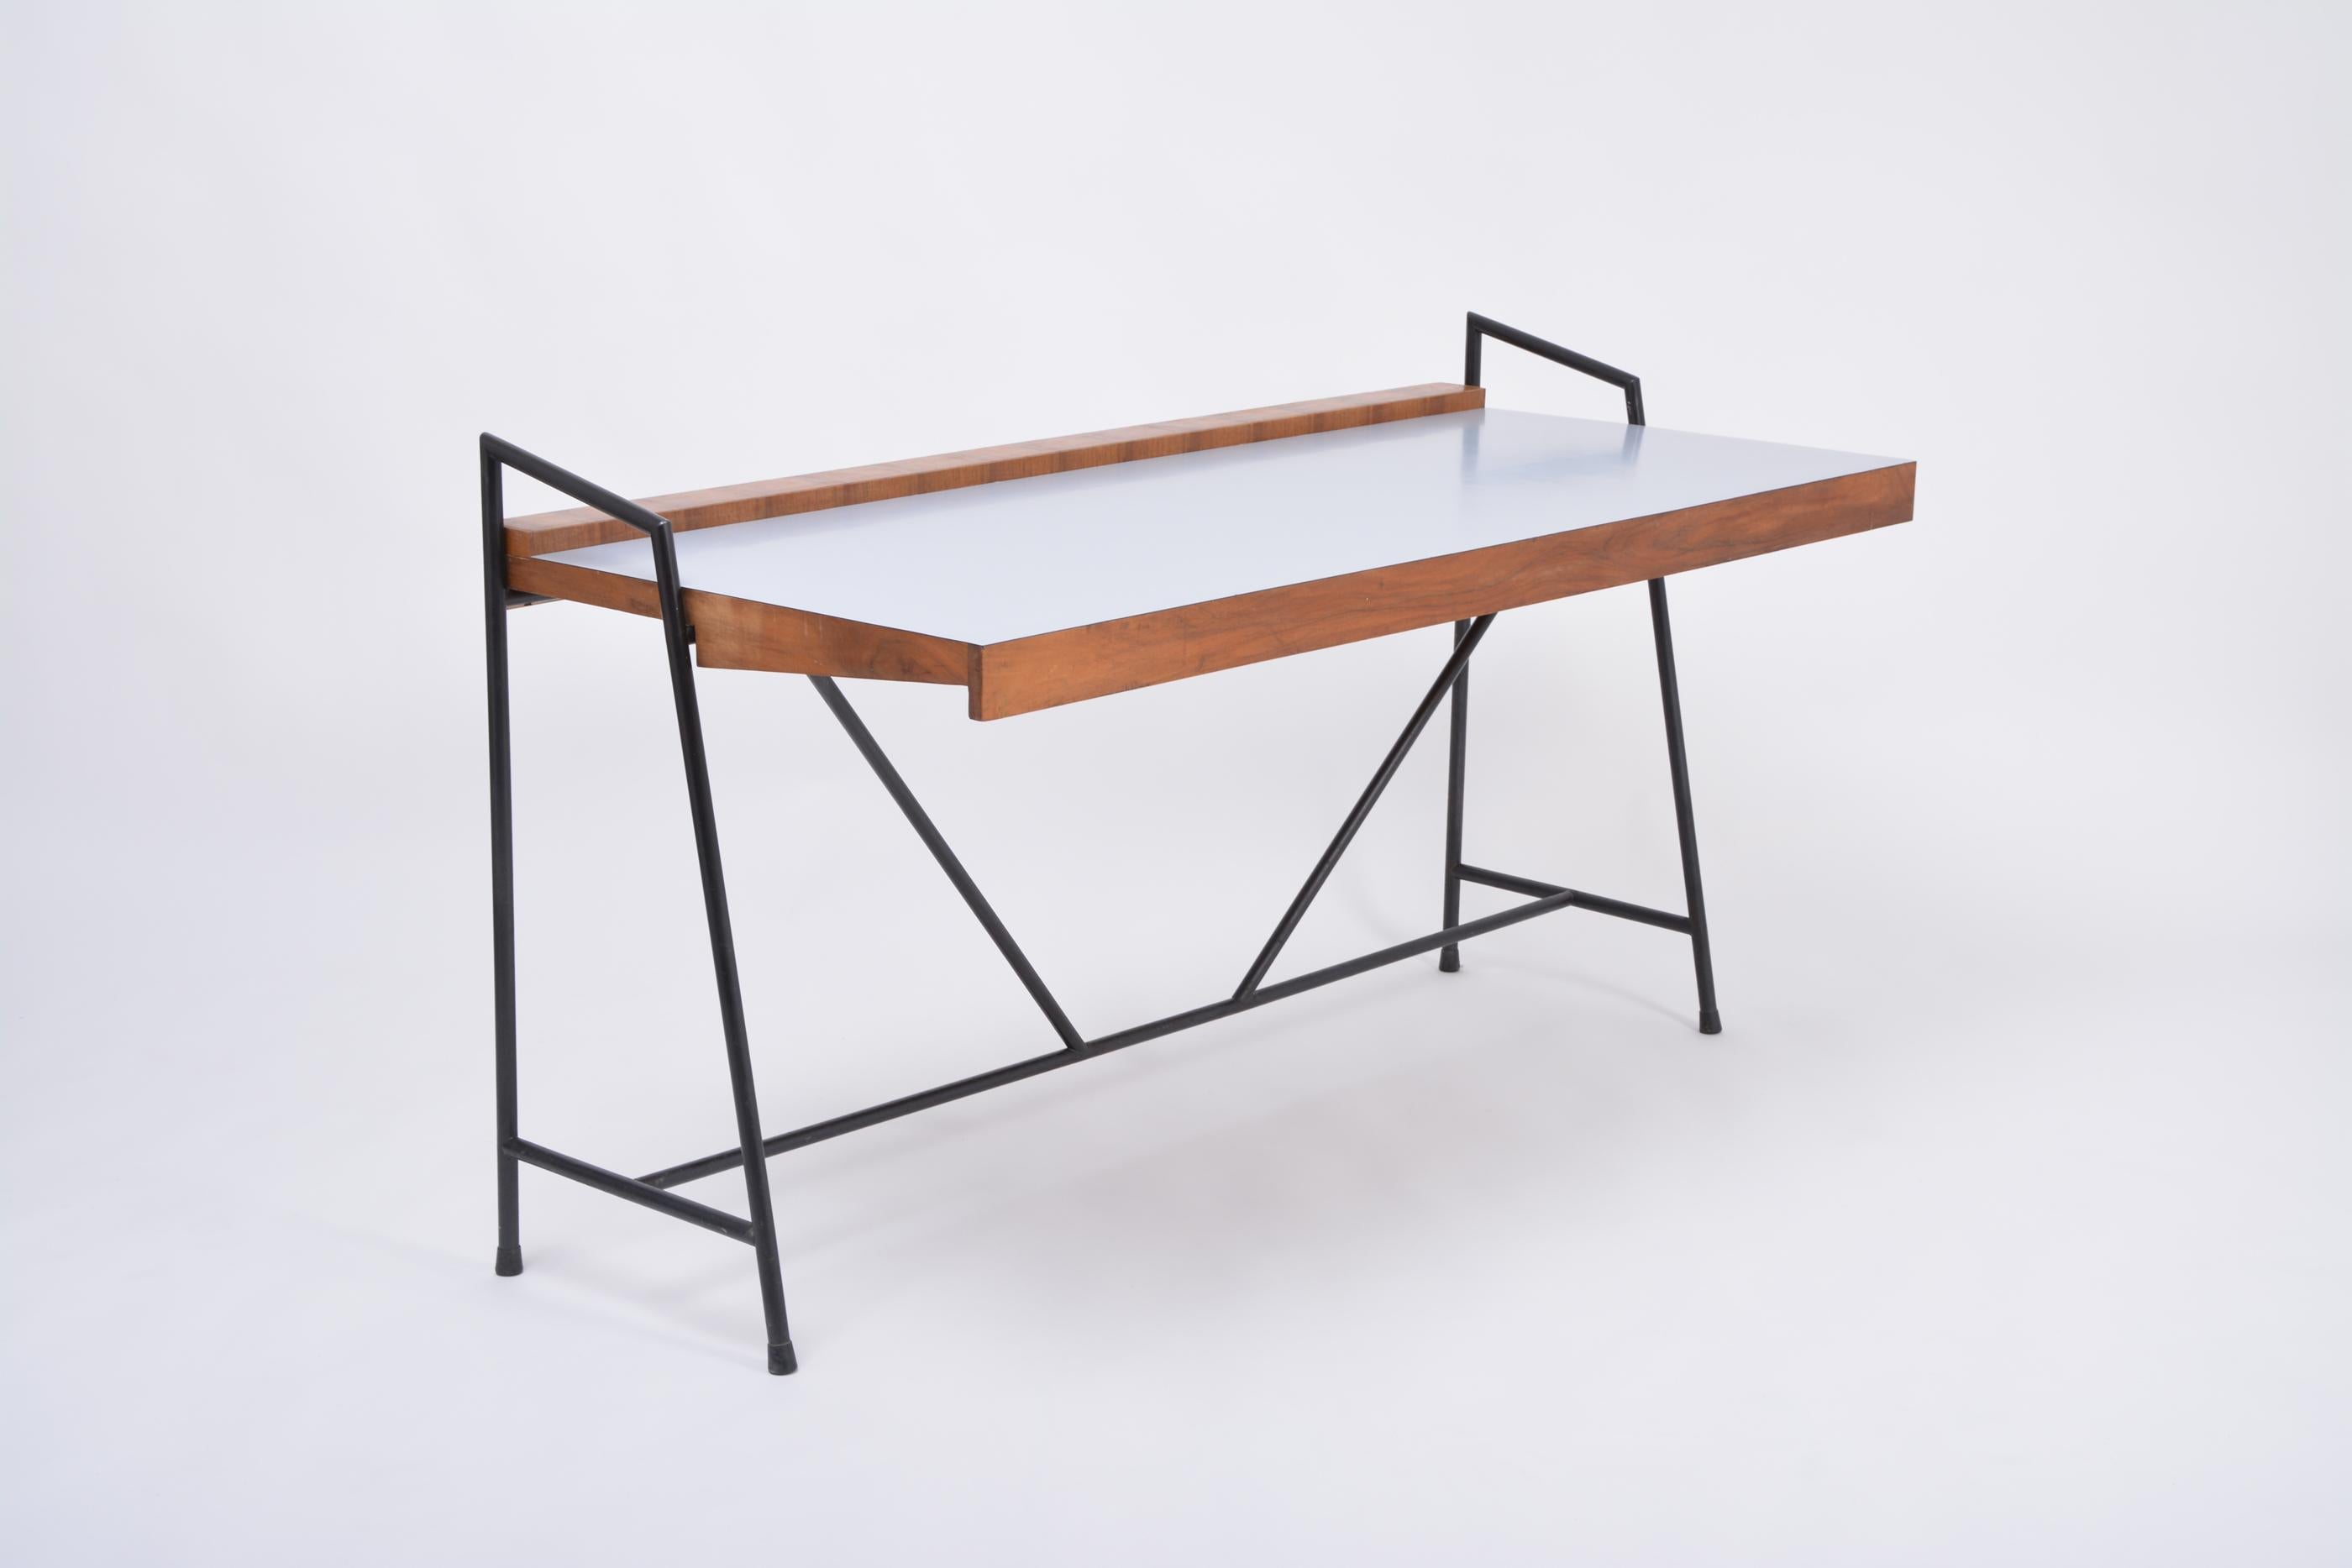 Large Italian Mid-Century Modern writing desk.
Spectacular large writing / working desk made in the 1950s in Italy. Clean-lined, elegant and simple structure made of lacquered steel with wooden desk covered in formica. Very lightweight. The top has